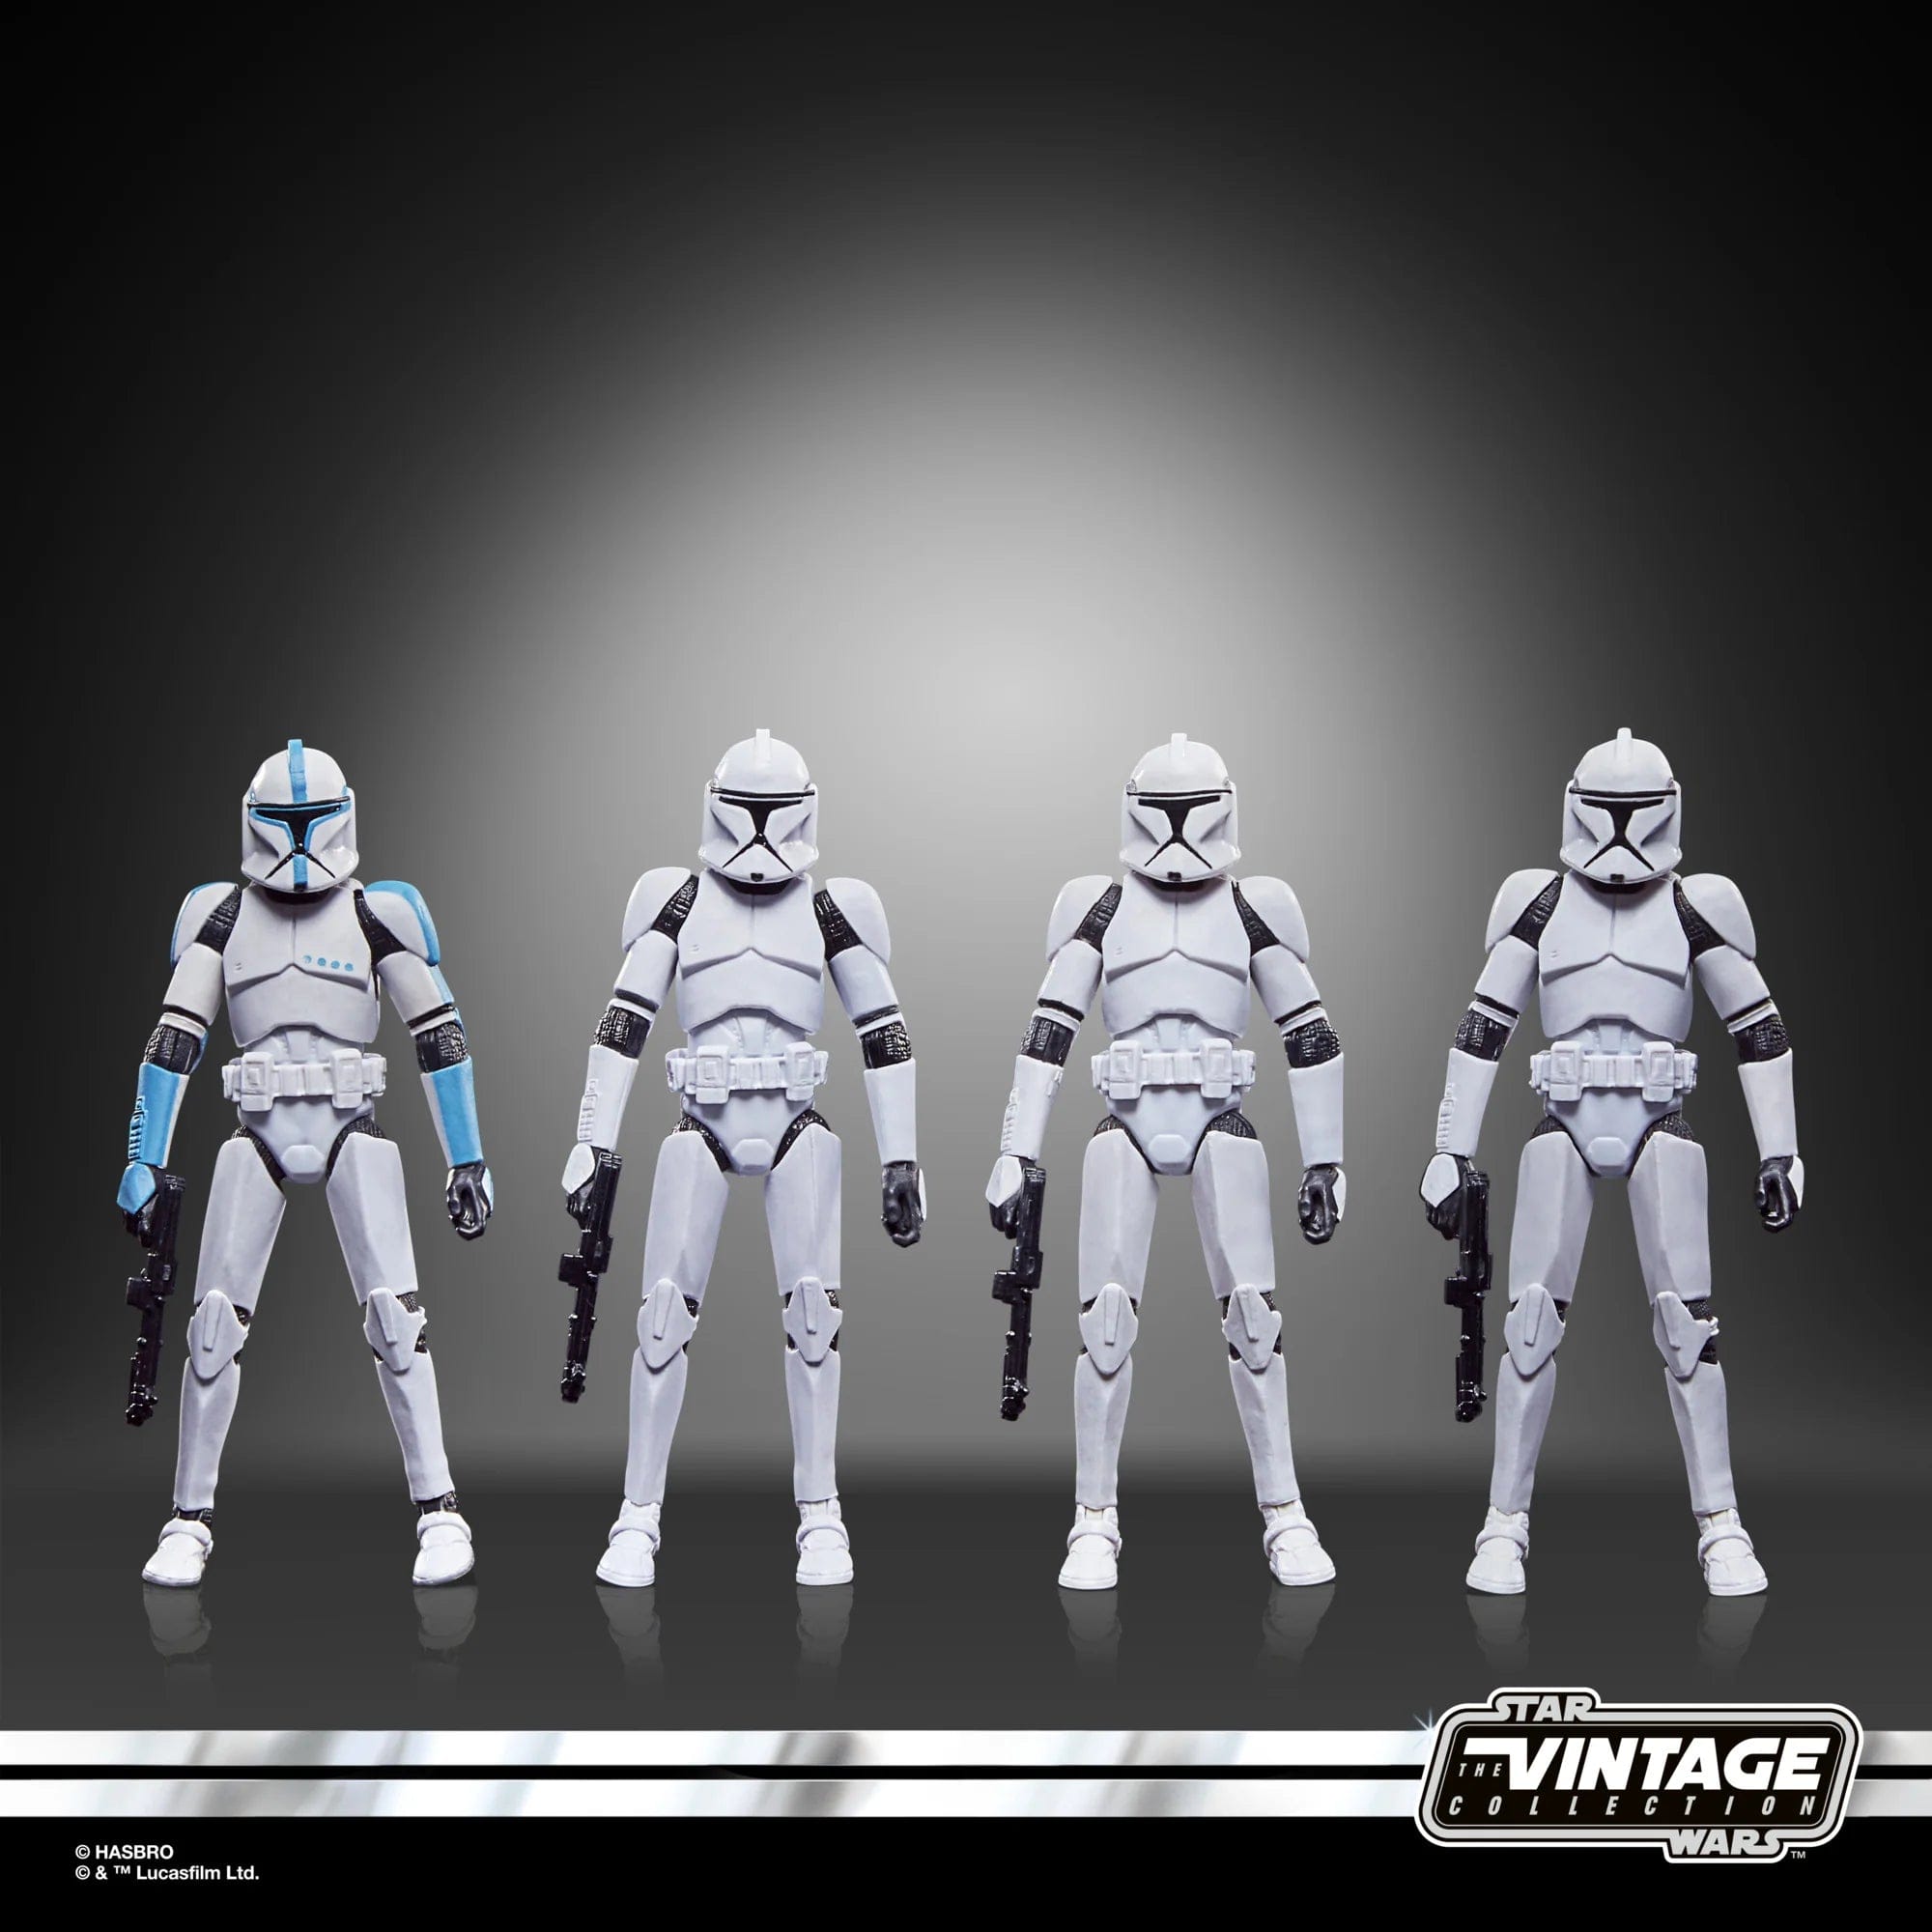 Hasbro Star Wars The Vintage Collection Phase I Clone Trooper Action Figure 4-Pack